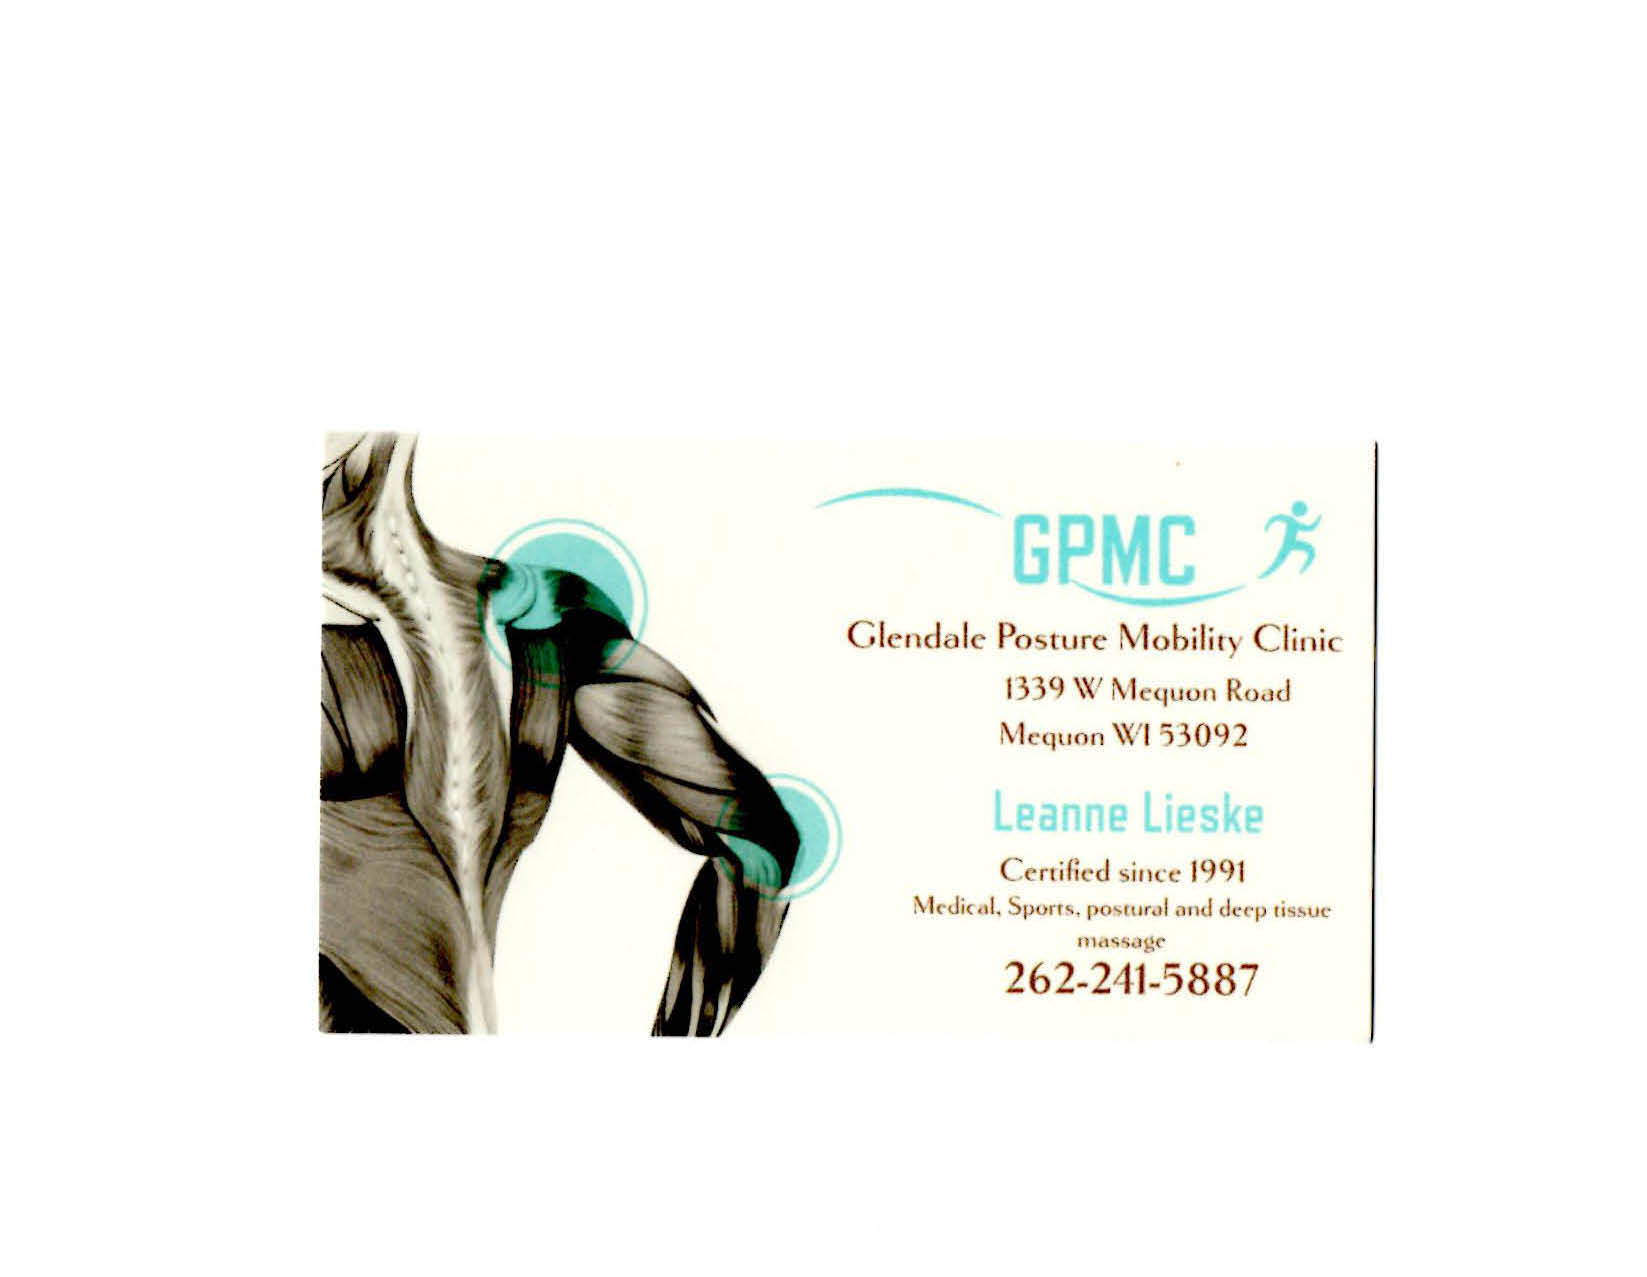 Glendale Posture Mobility Clinic